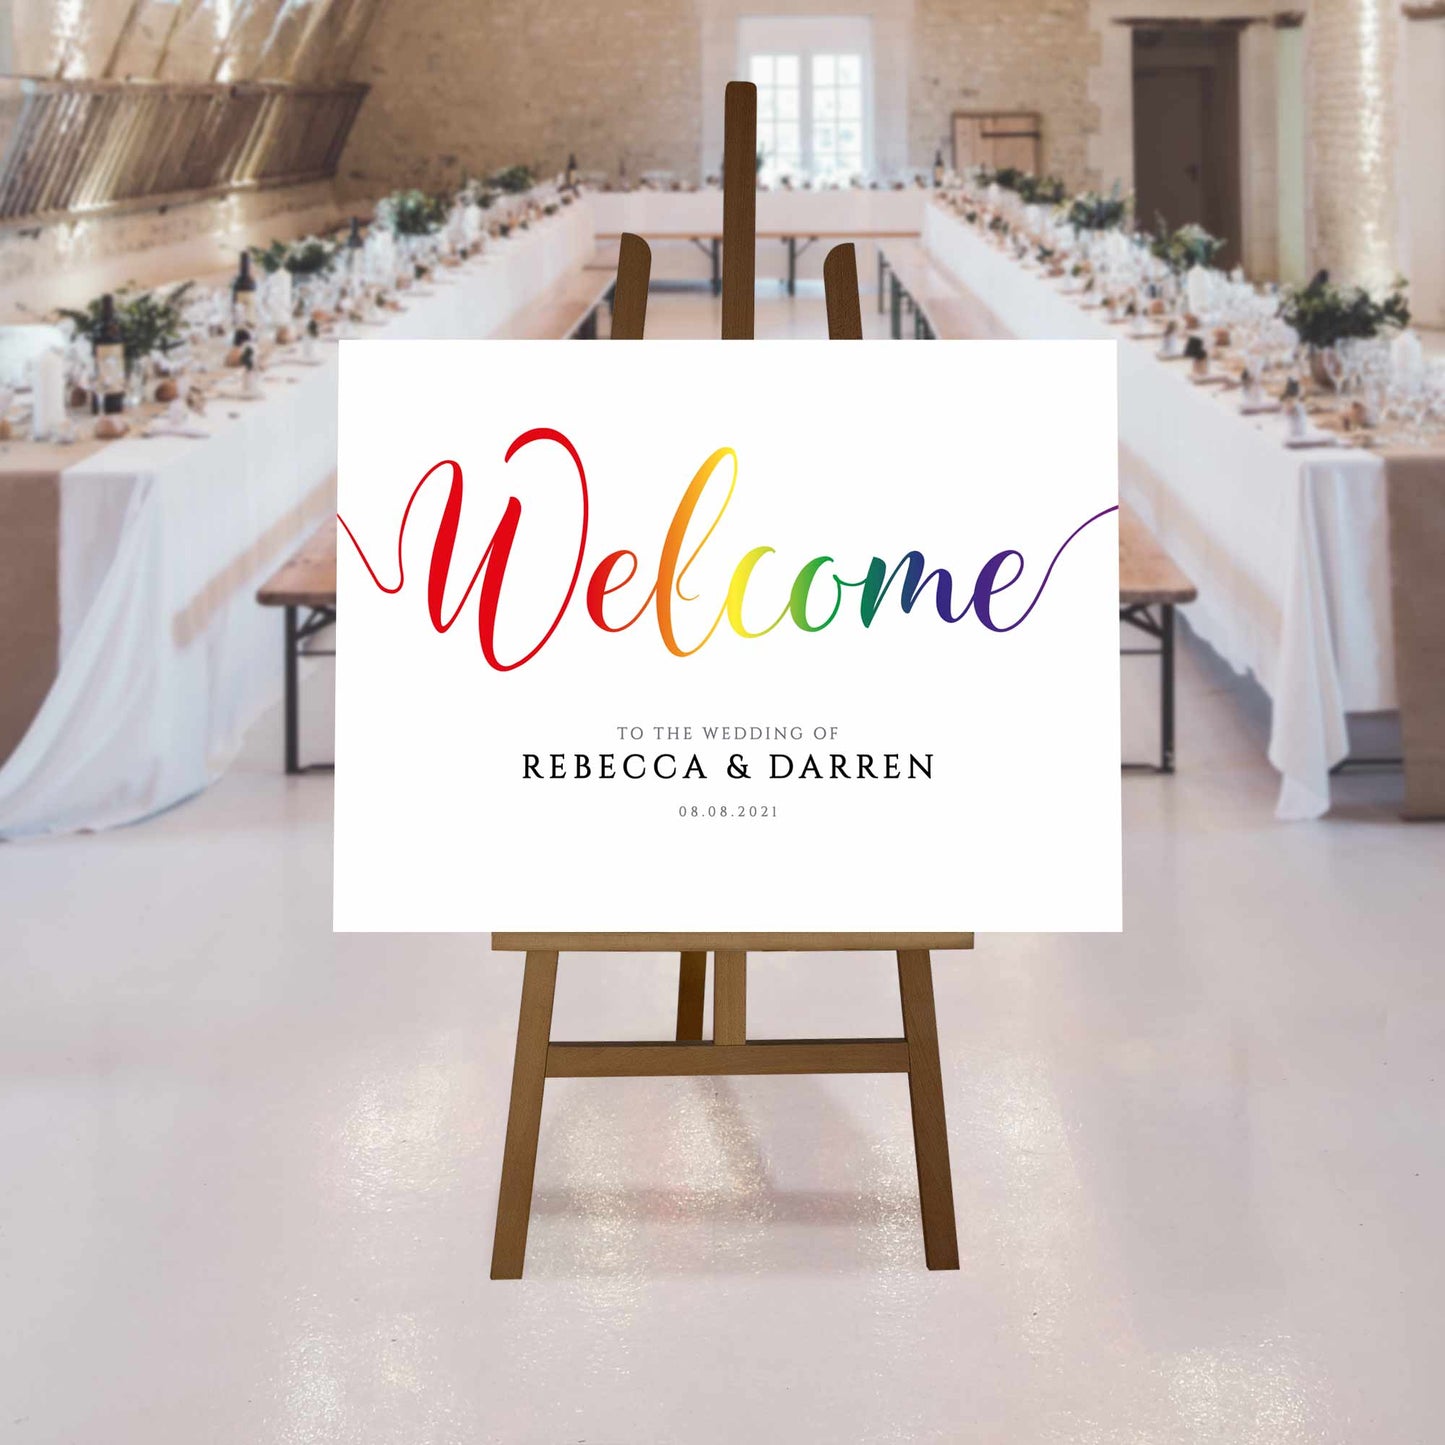 printed pride rainbow welcome sign at a rustic wedding reception